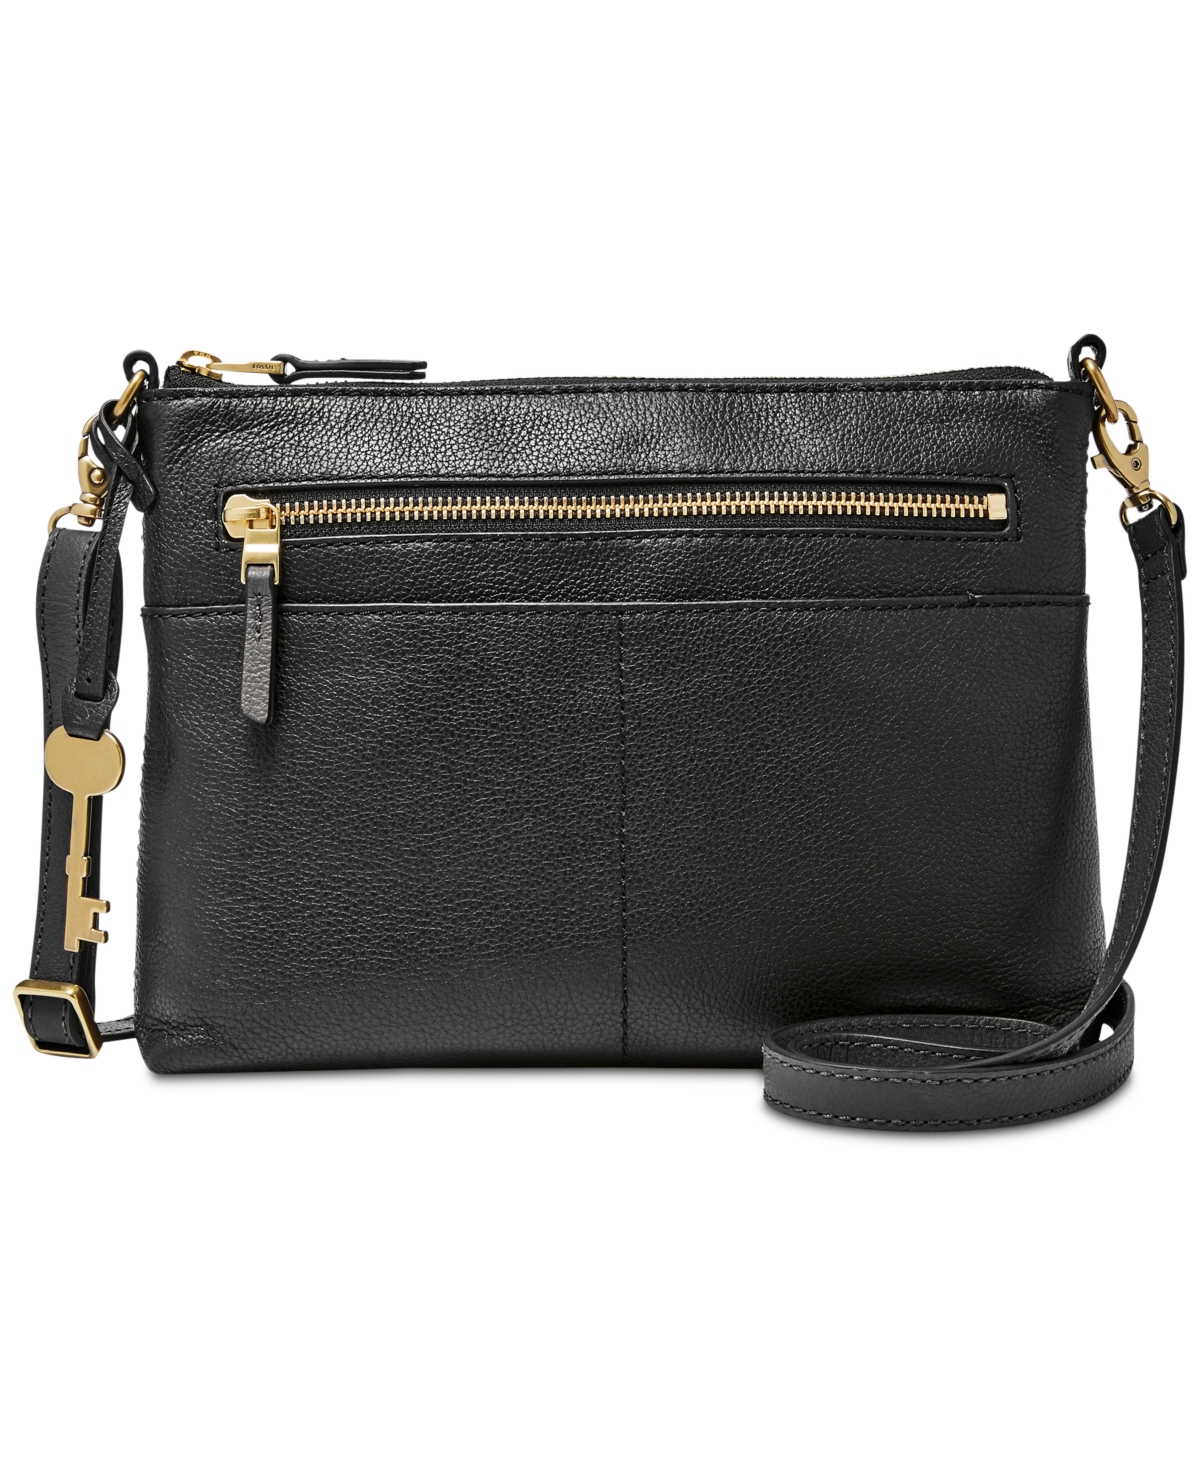 Fossil Women's Fiona Small Leather Crossbody In Black,gold